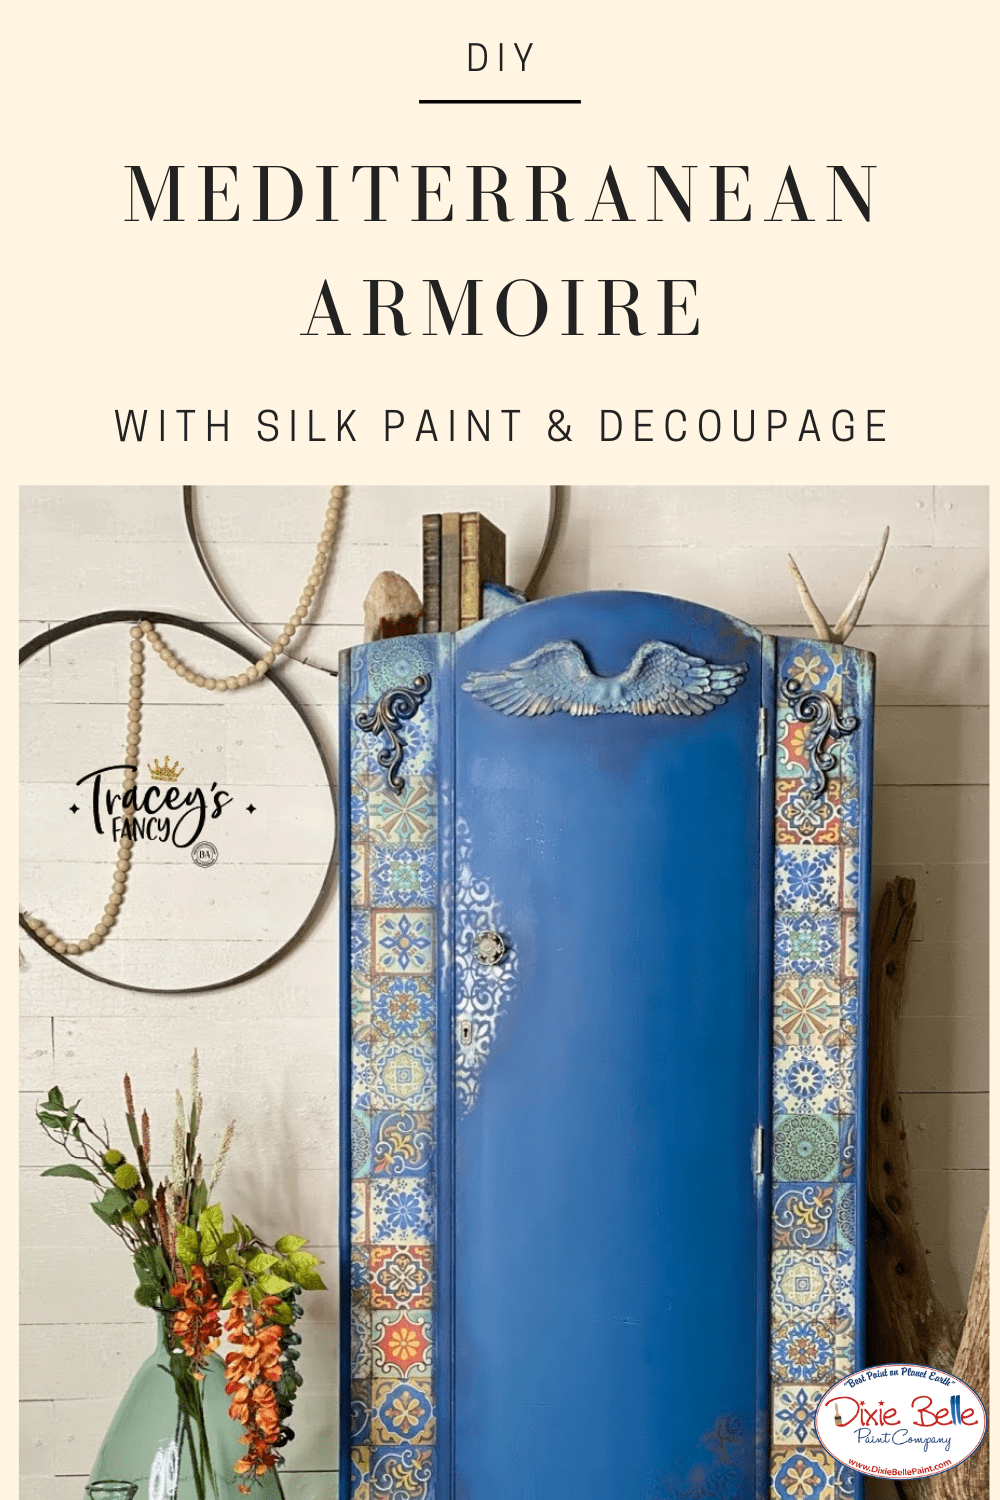 Mediterranean Armoire with Silk Paint and Decoupage